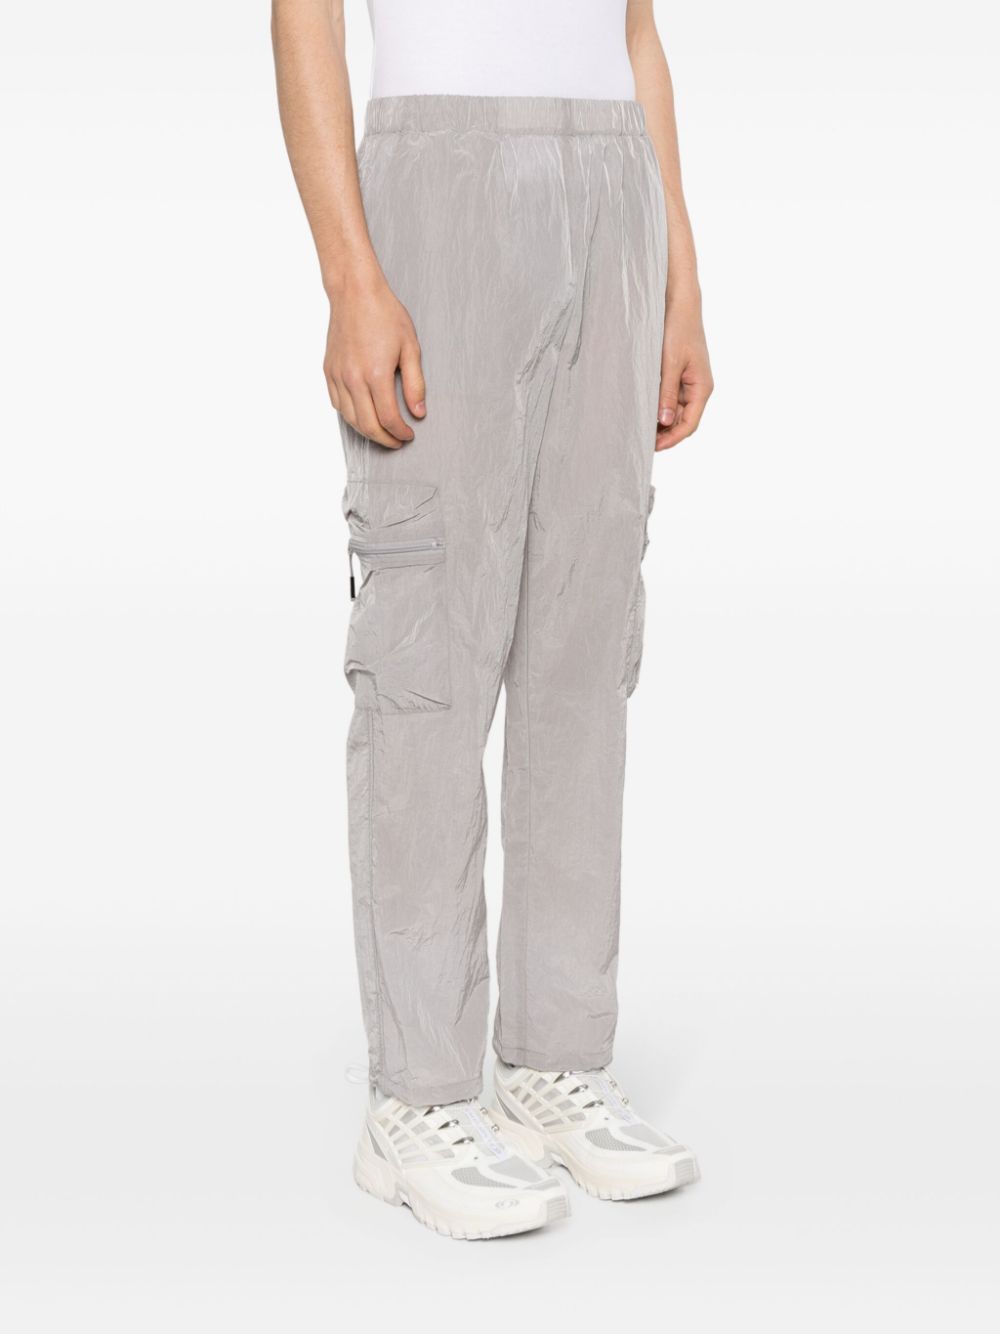 Kano gray trousers